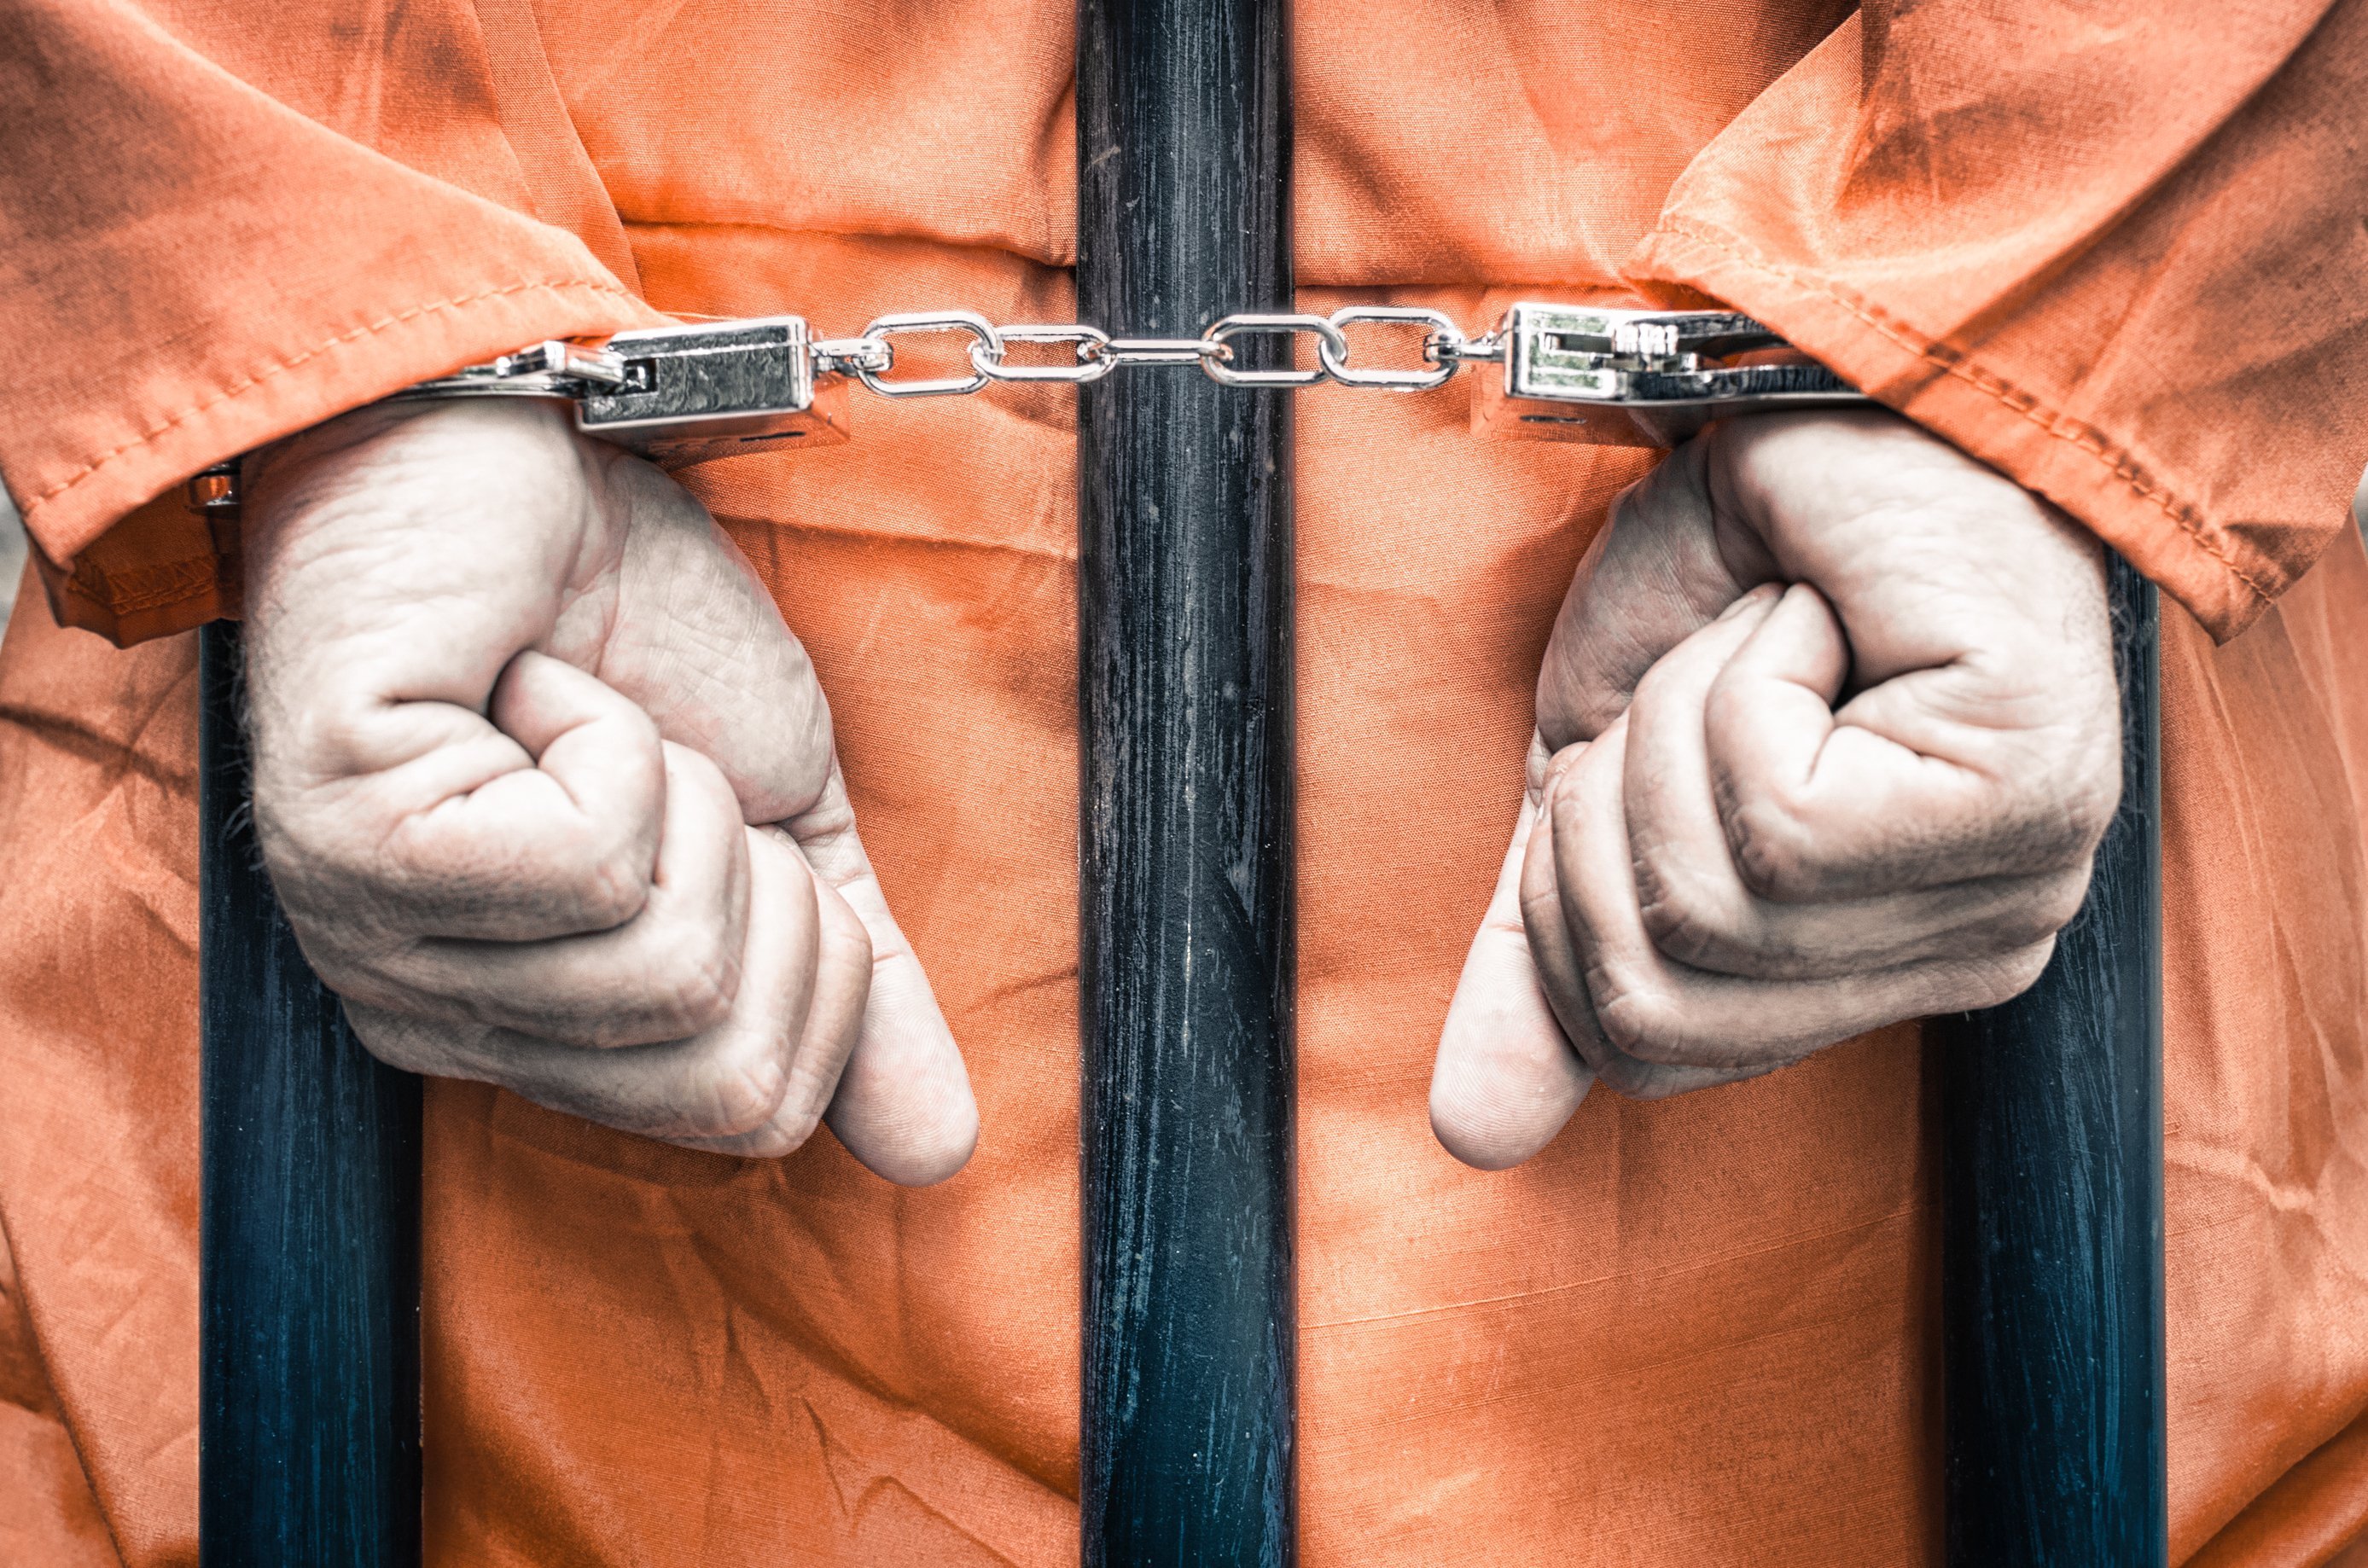 Handcuffed prisoner behind the bars of a prison. | Source: Shutterstock